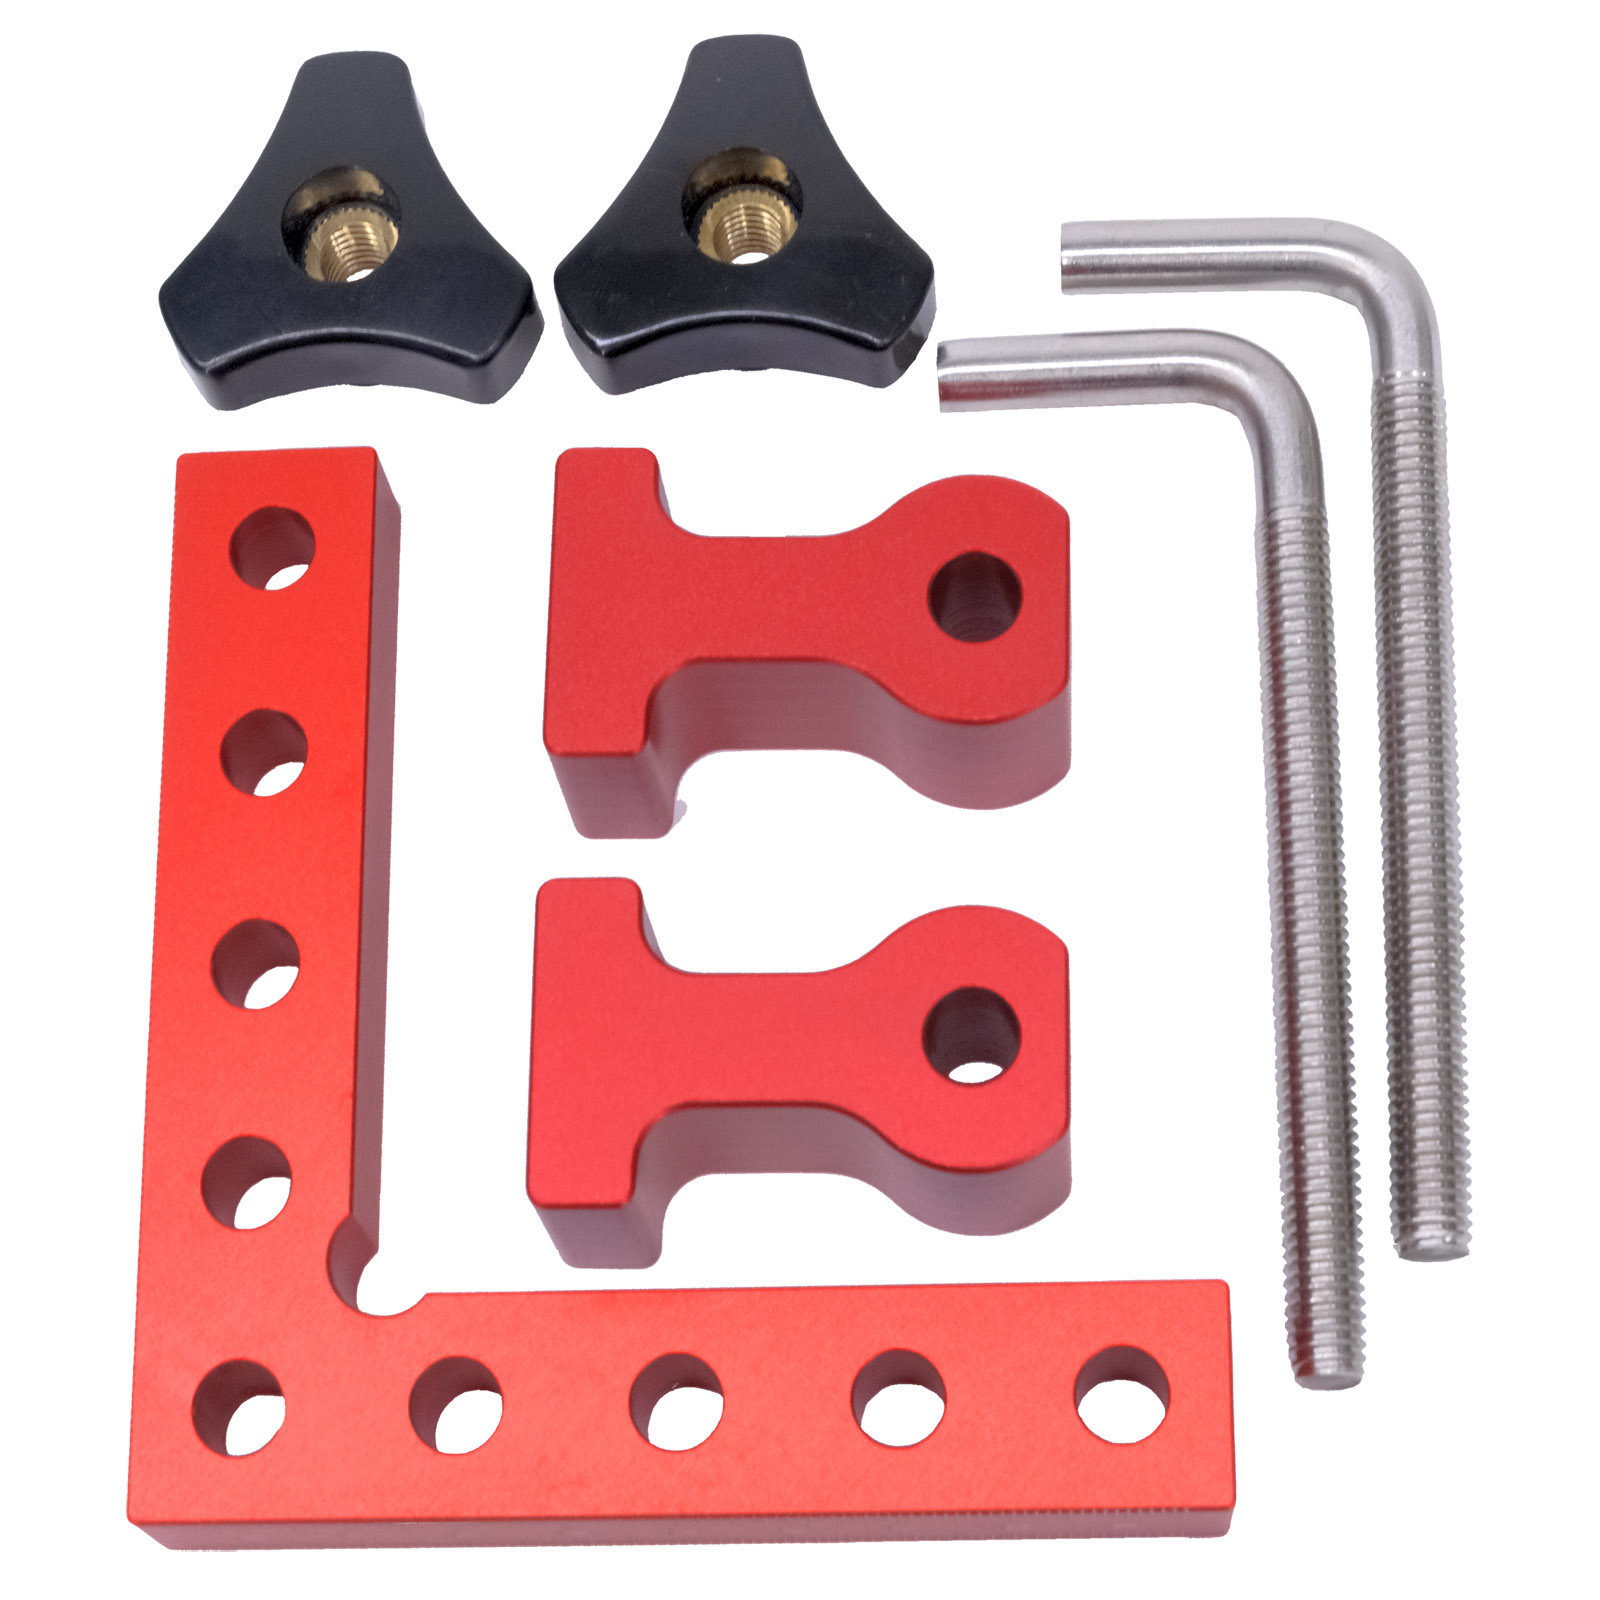 90 Degree Corner Clamps (Set of 2 Clamps) at Penn State Industries